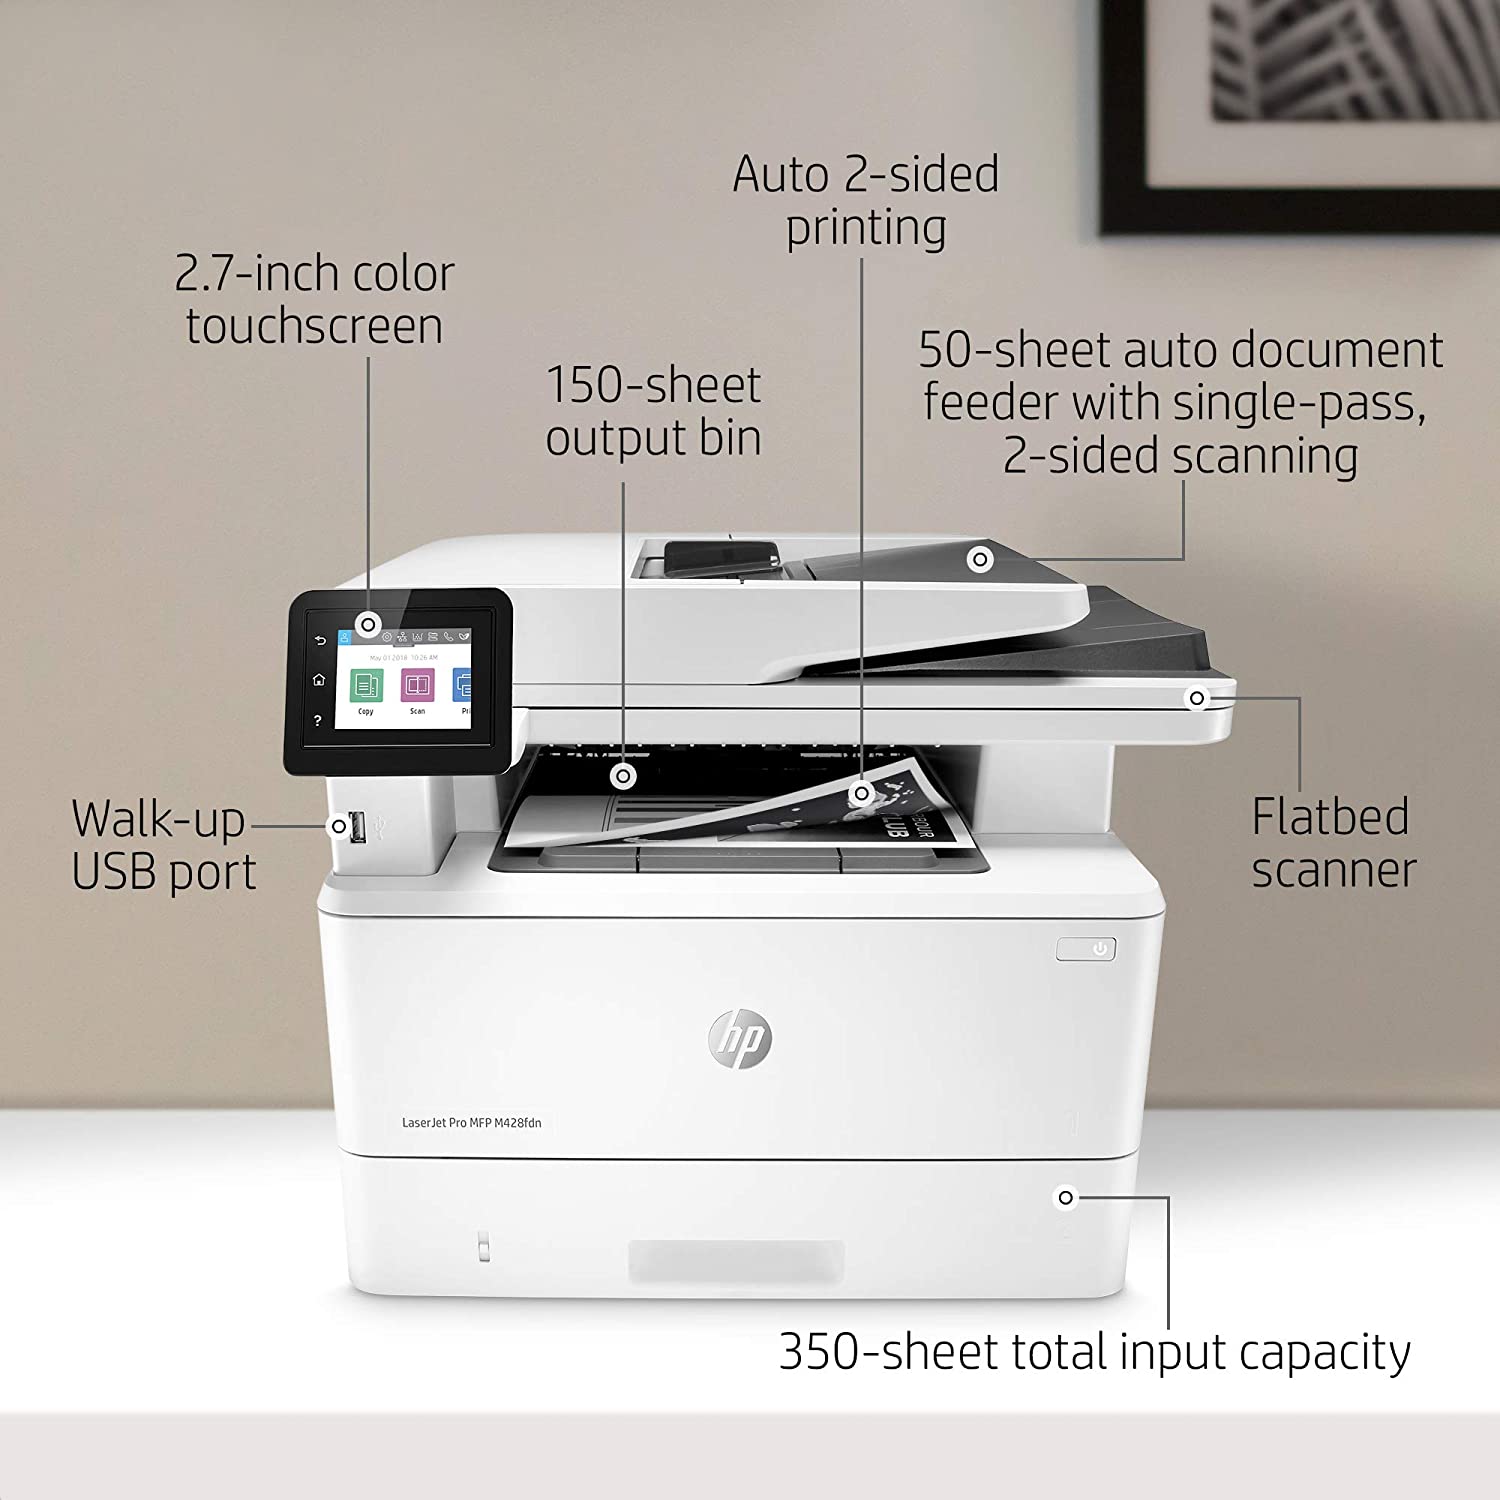 HP W1A29A#BGJ Laserjet Pro M428fdn Network Monochrome Laser all-in-one Printer: Copy, Scan, Fax, Printing - image 2 of 6